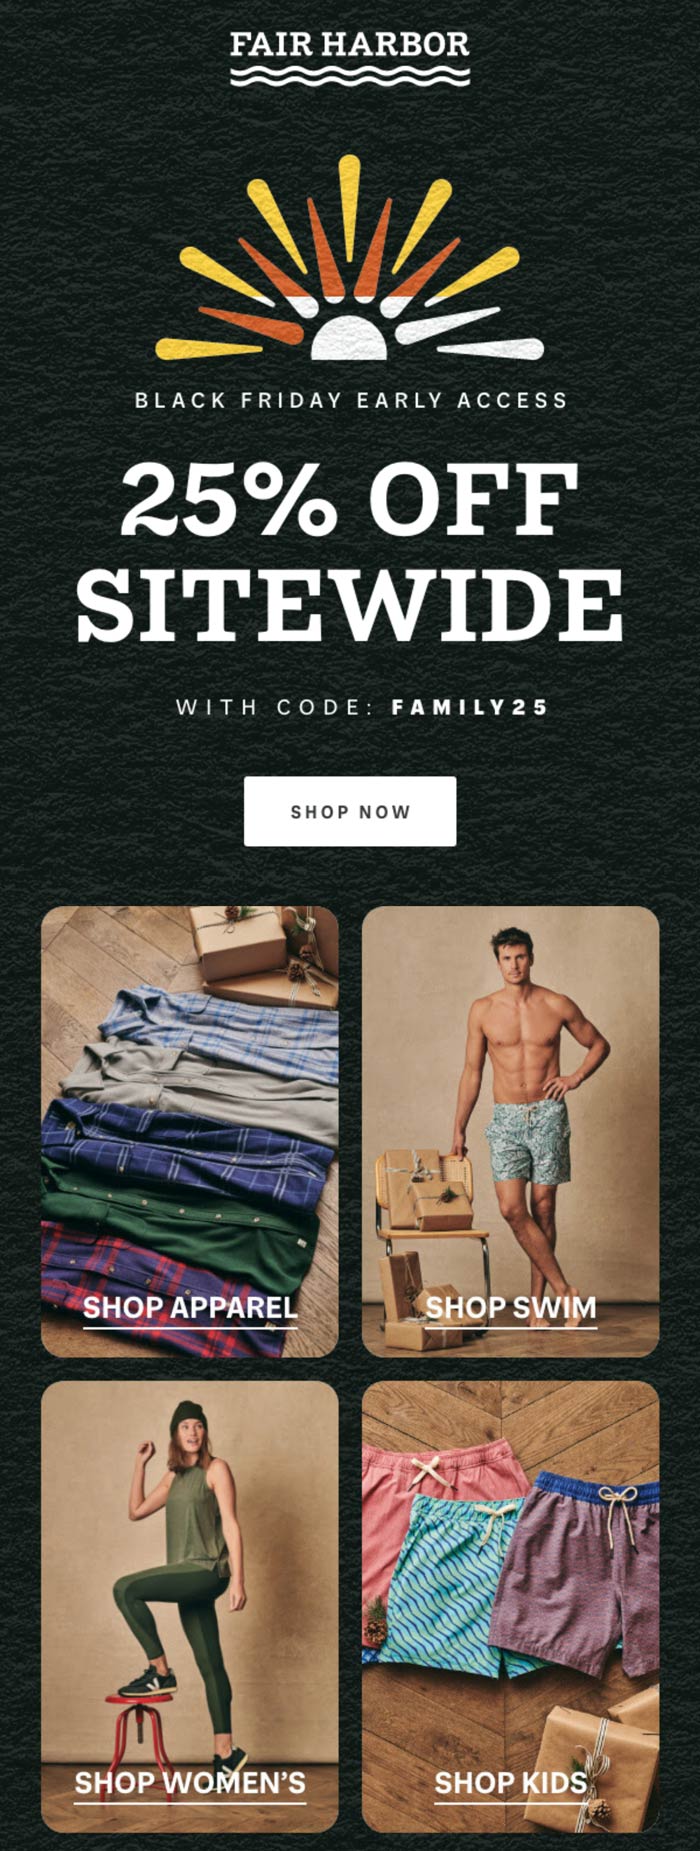 Fair Harbor stores Coupon  25% off everything online at Fair Harbor via promo code FAMILY25 #fairharbor 